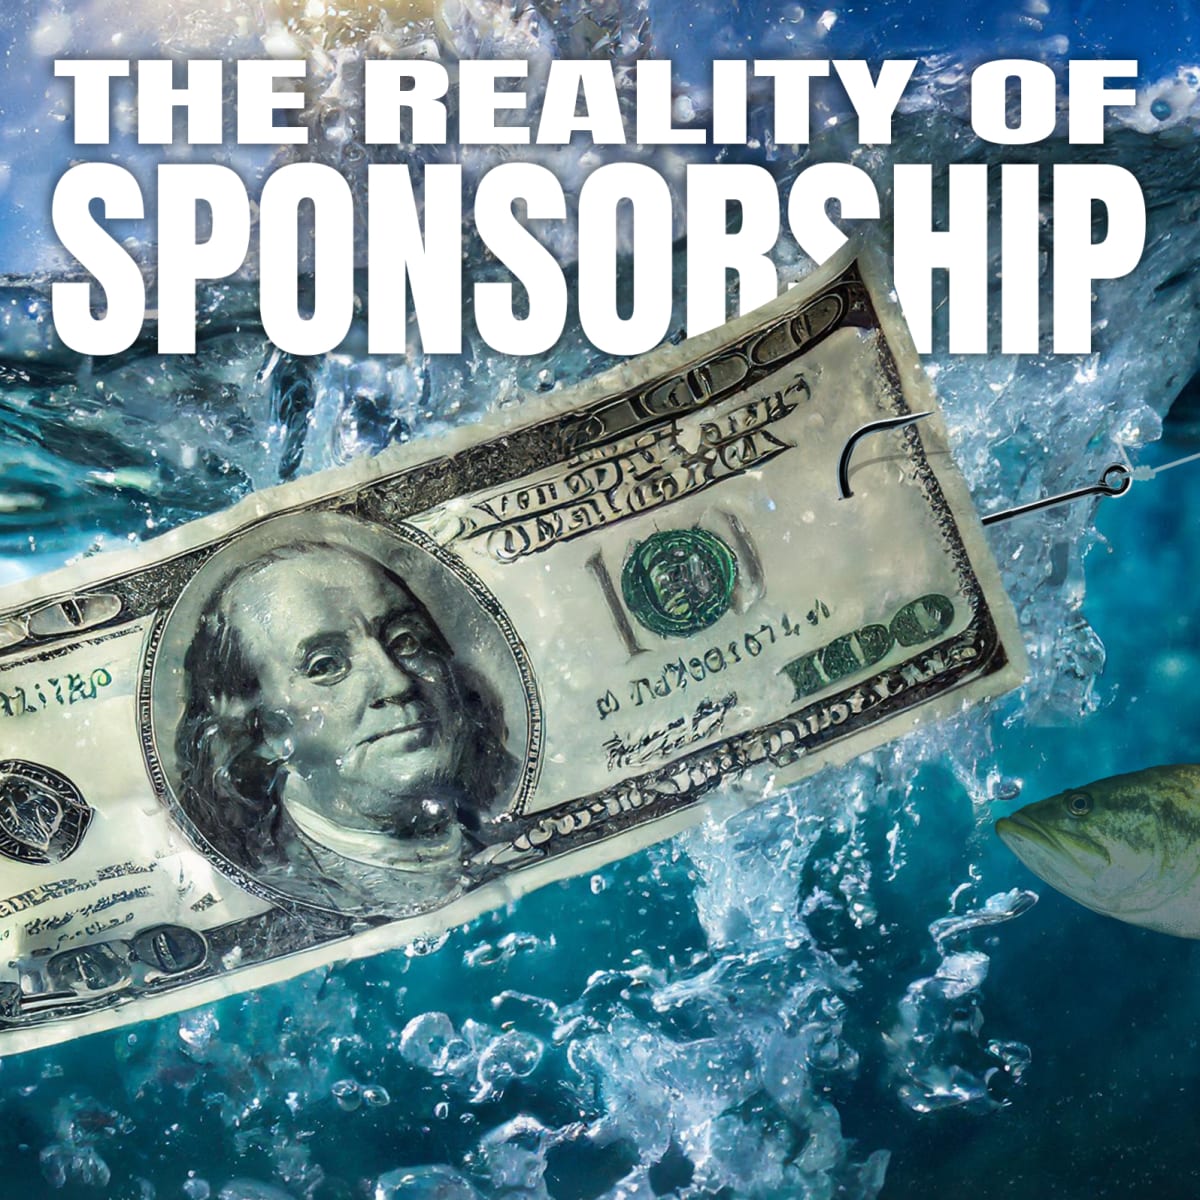 The Truth About Bass Fishing Sponsorship - Men's Journal